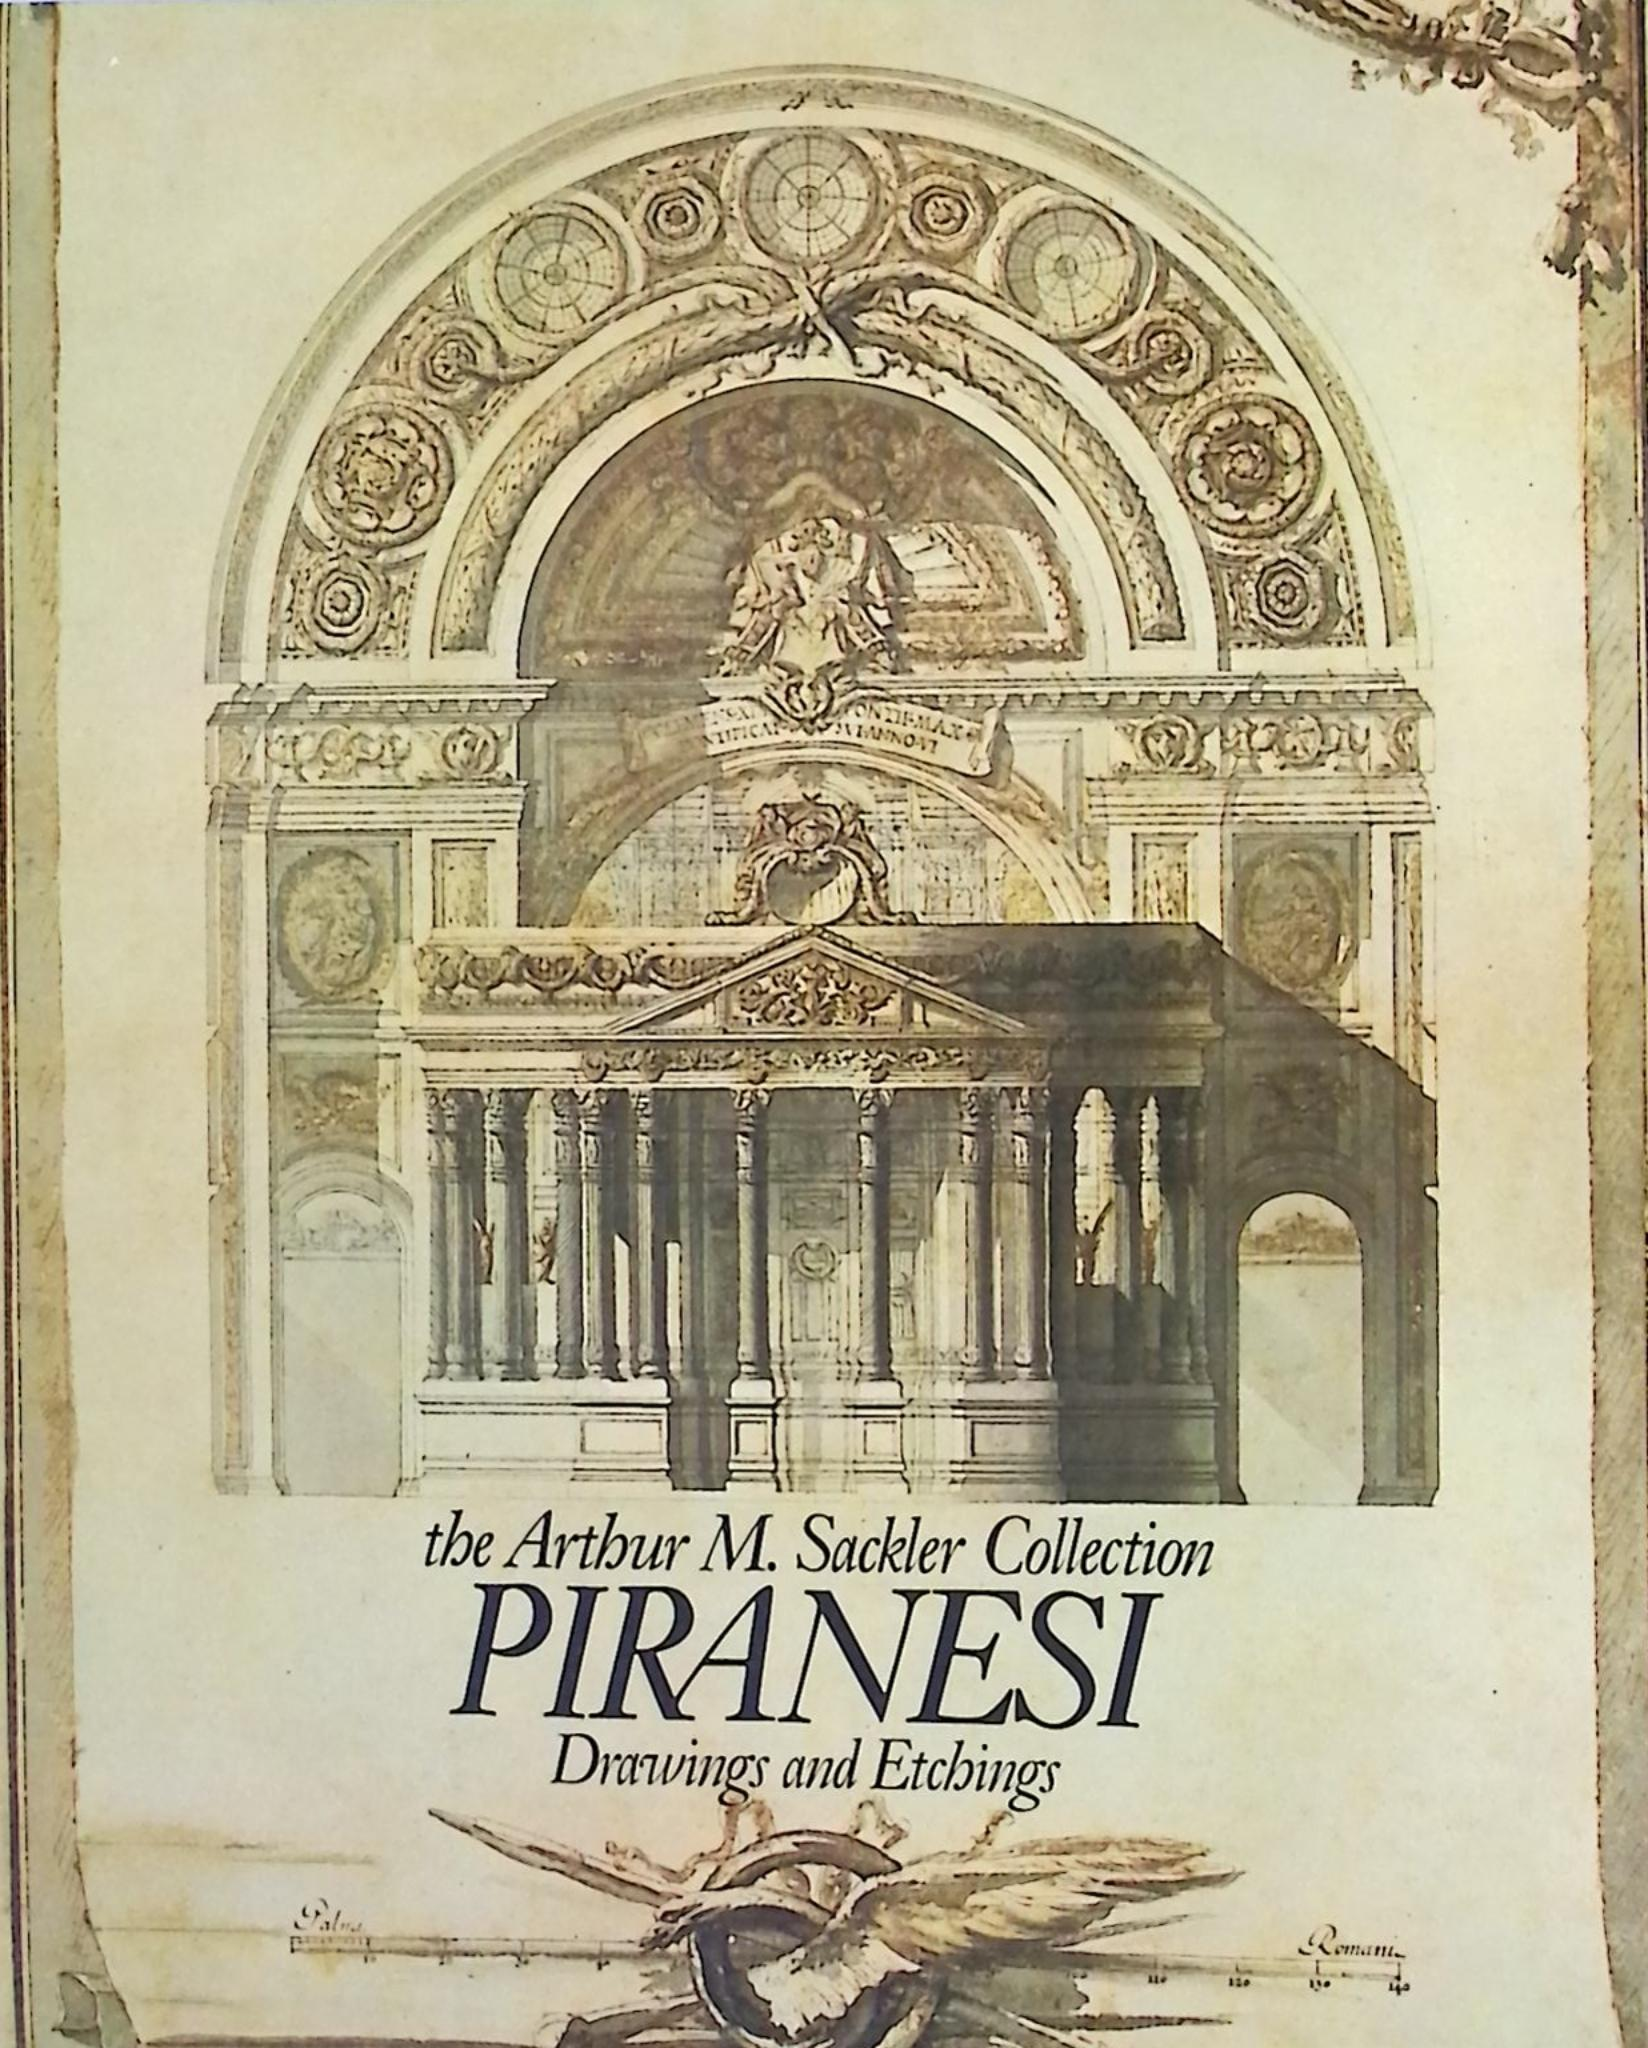 The Arthur Sackler Collection Piranesi. Drawings and Etchings at the Avery Architectural Library Columbia University, New York.